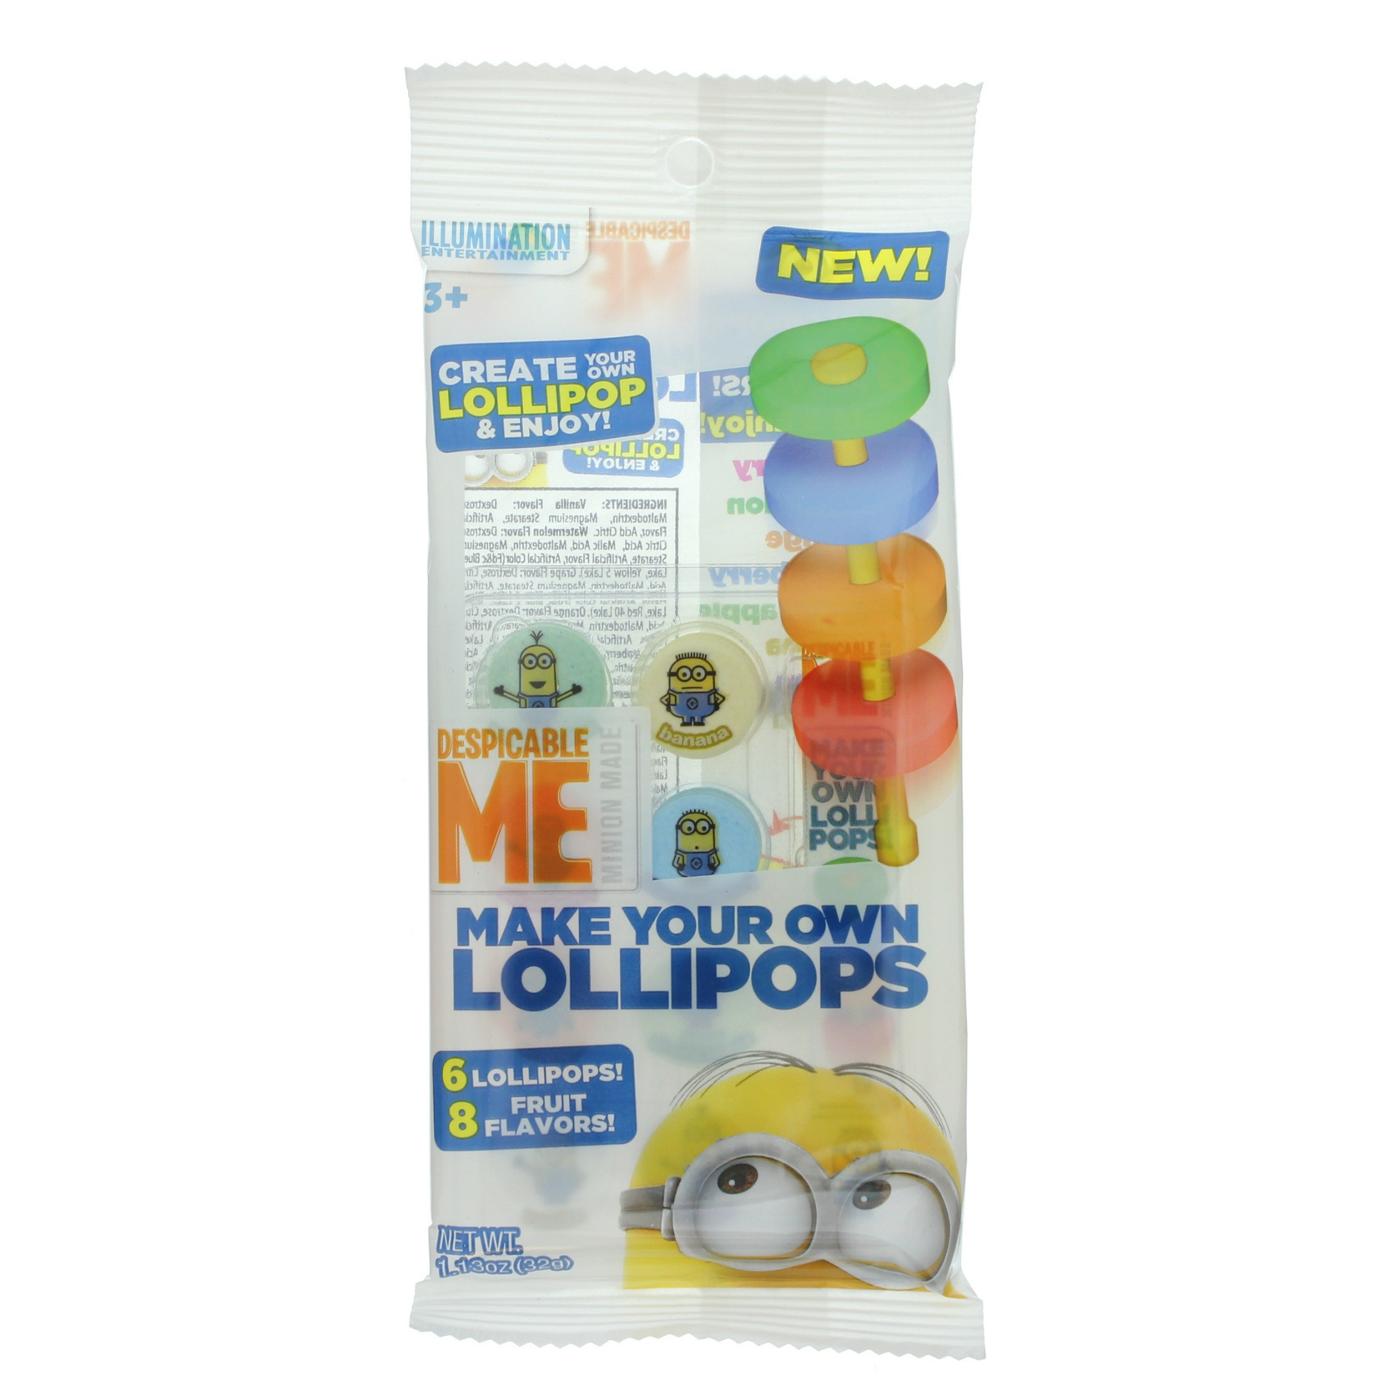 Hilco Minions Make Your Own Lollipop; image 1 of 2